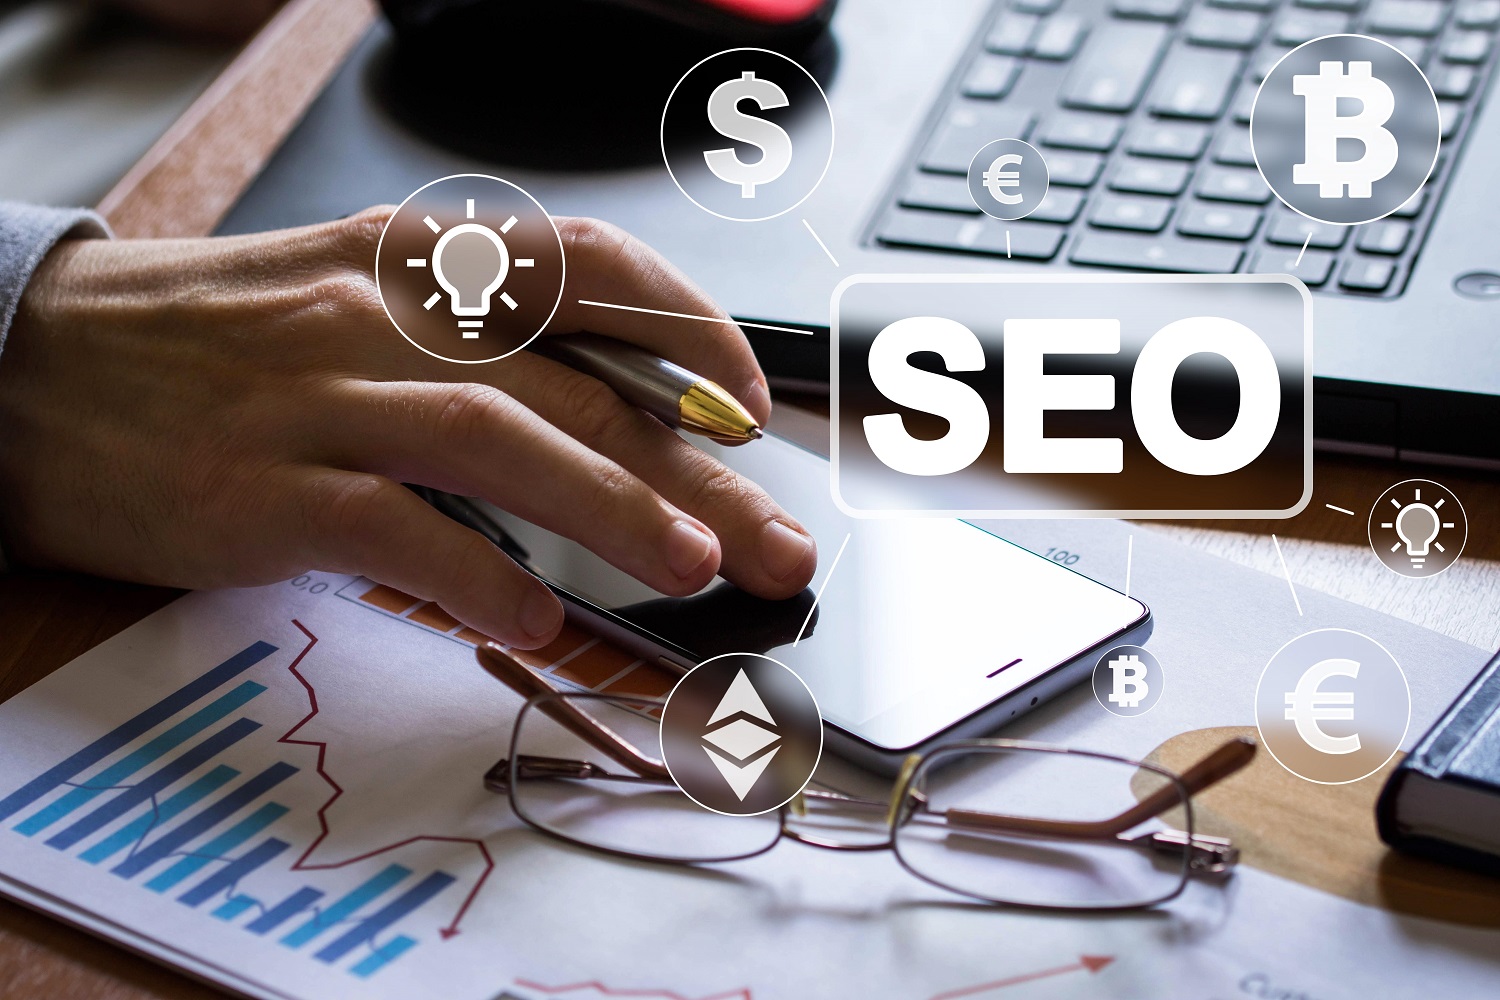 Why should Canadian businesses invest in SEO?